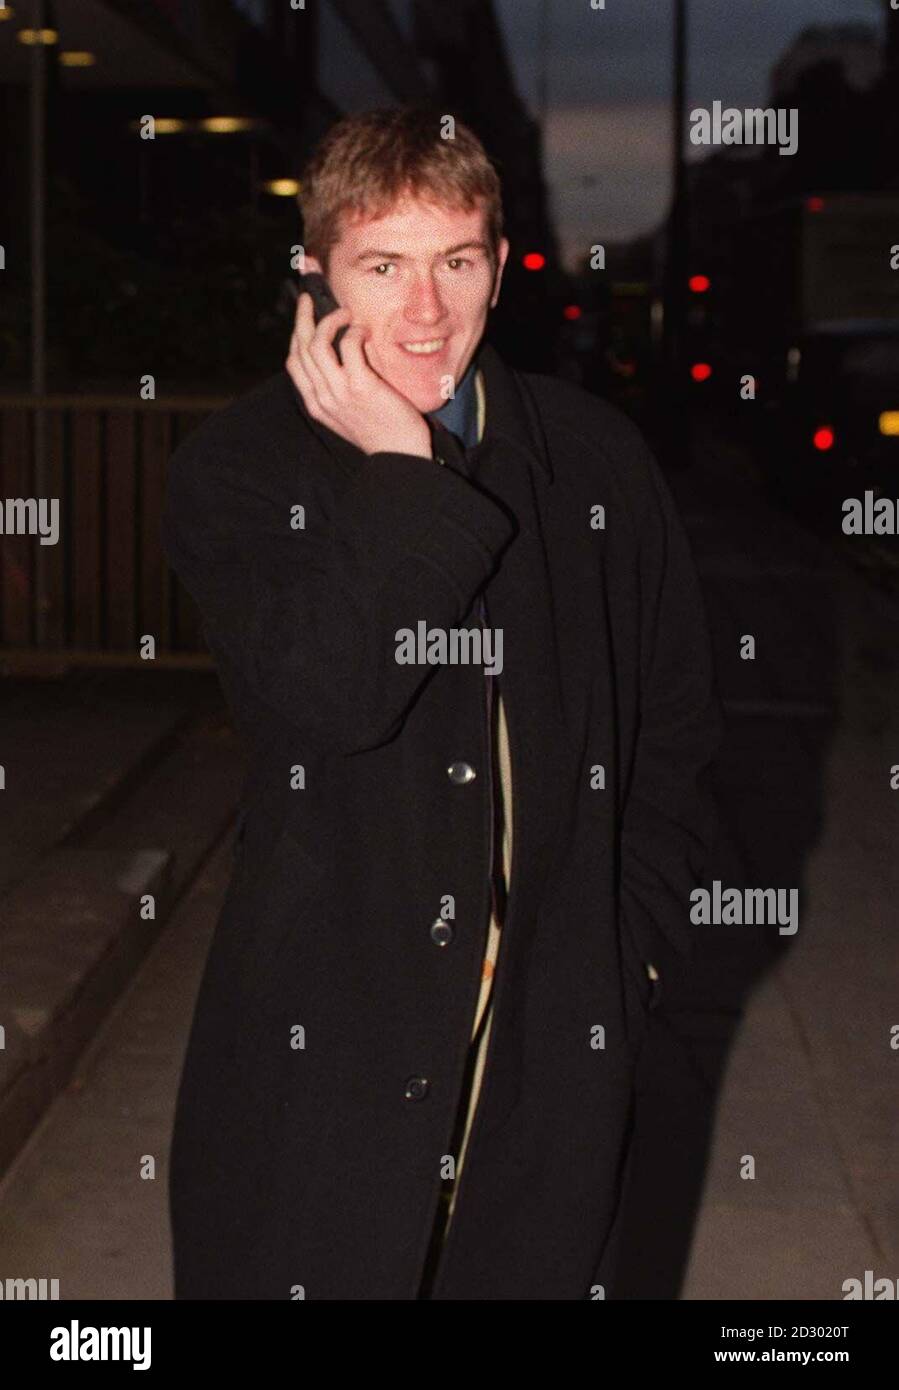 Record-breaking jump jockey Tony McCoy arriving to face the Jockey Club's Disciplinary Committee today (Monday 16th November 1998) where he is expecting a lengthy ban over his controversial use of the whip. McCoy was referred to Portman Square after his fifth whip offence in seven months for his ride on Bamapour at Fontwell last Monday. Photo by Michael Stephens/PA. See PA story Racing McCoy. Stock Photo